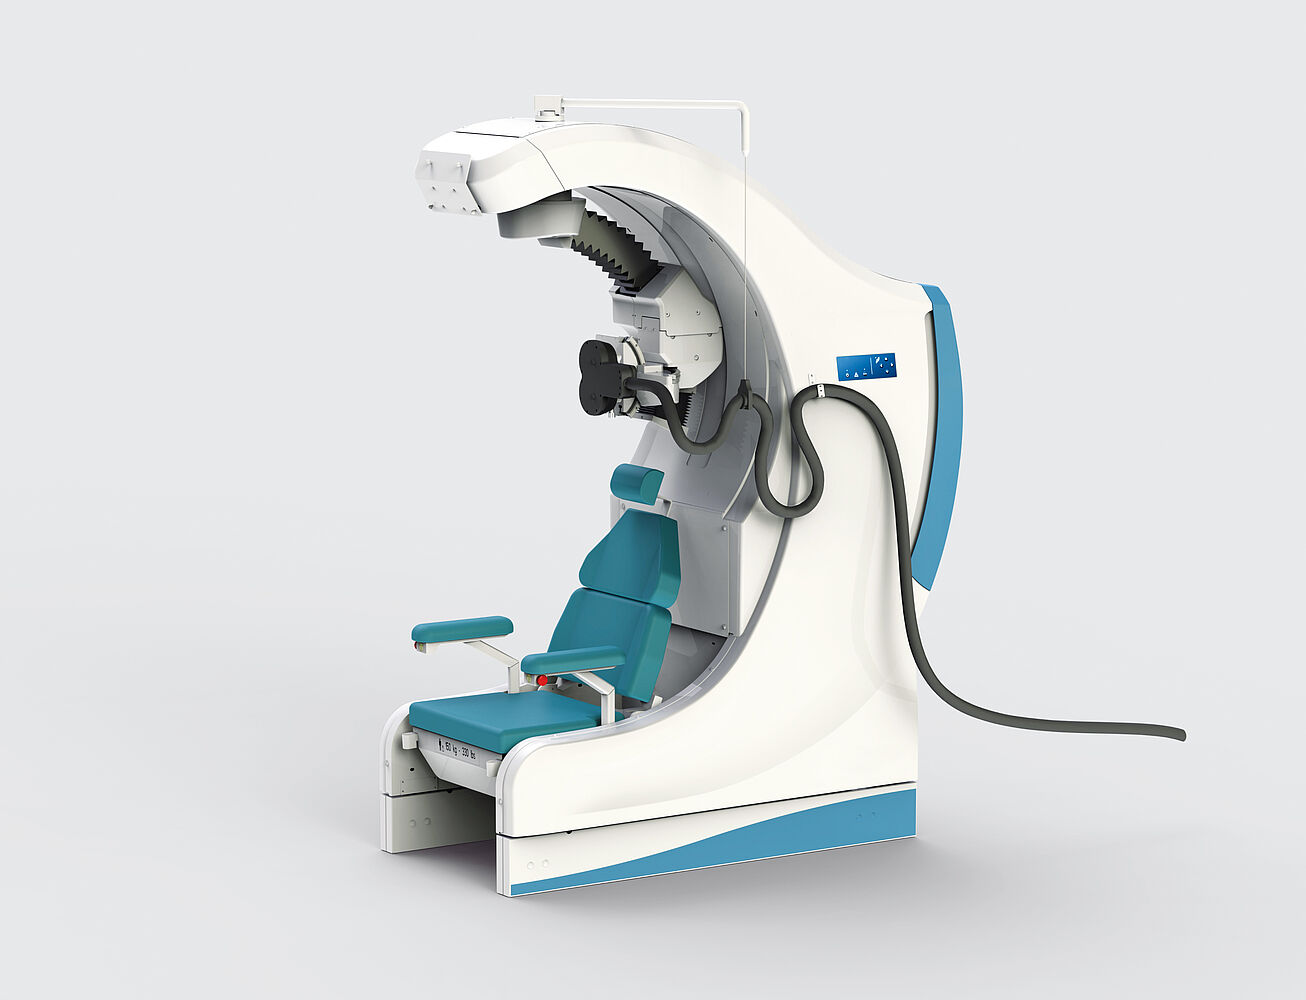 Brushless motor in High-tech medical robotic assistant